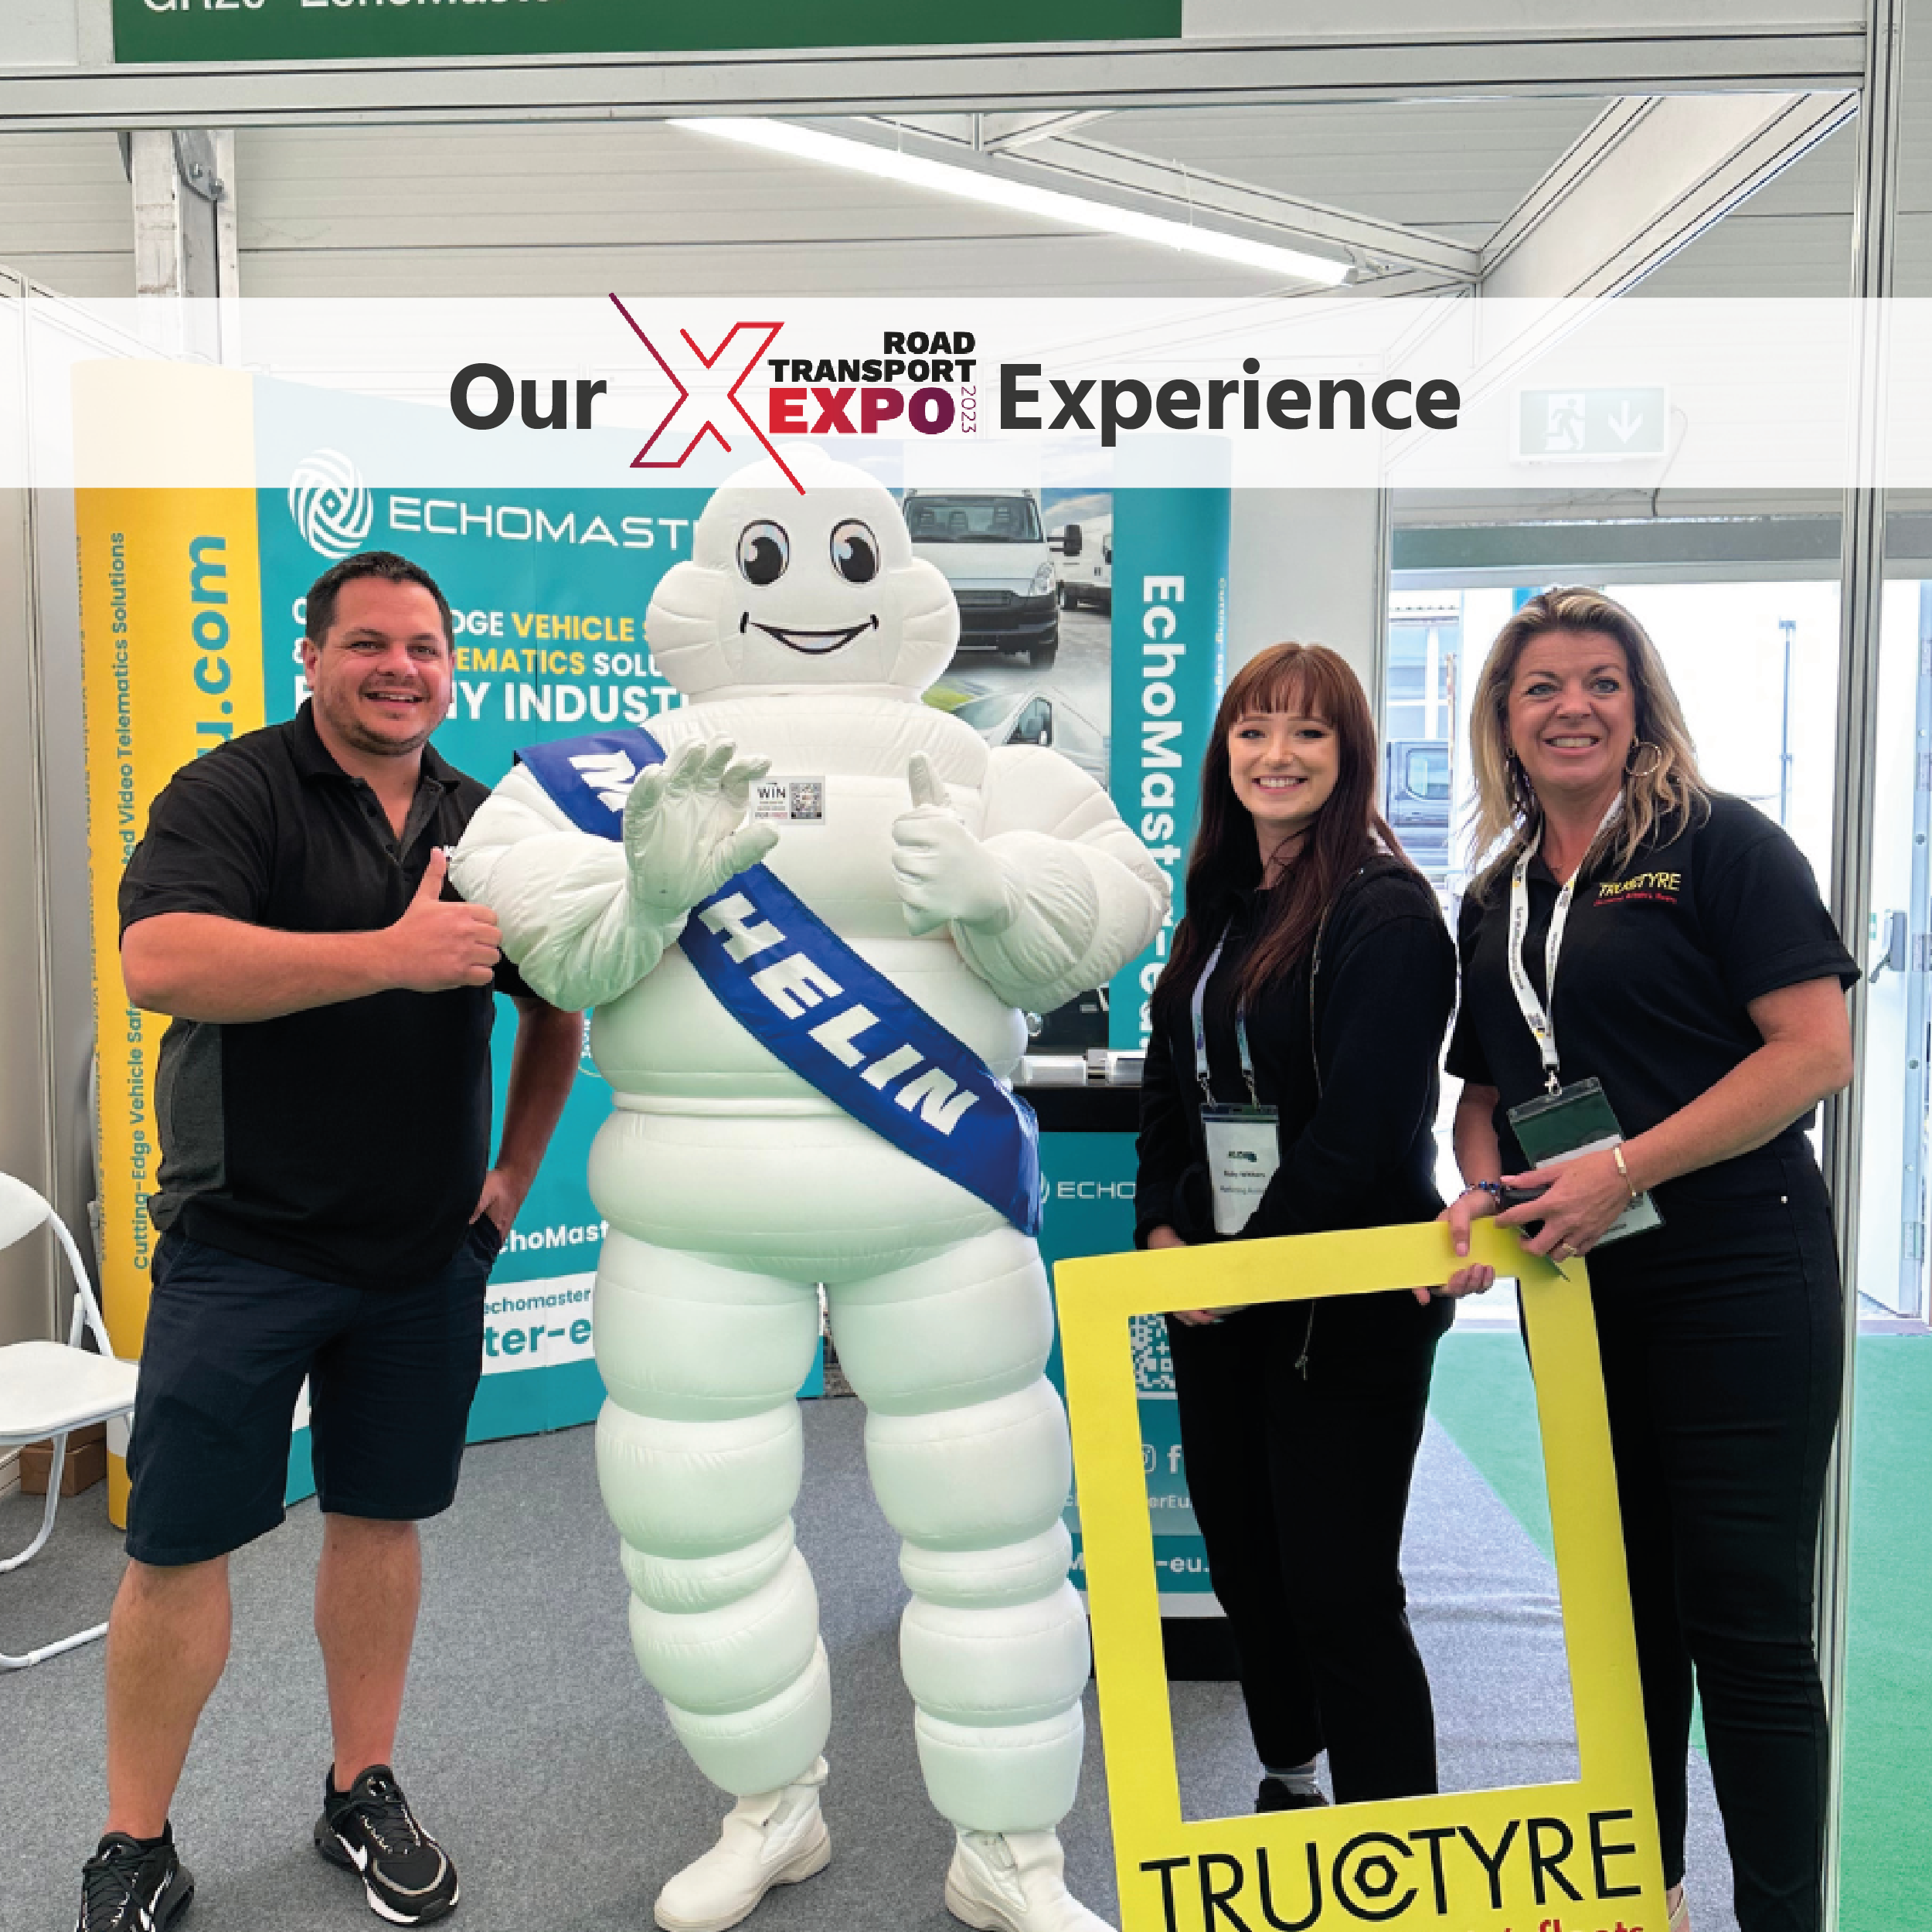 Image of Our Road Transport Expo Experience